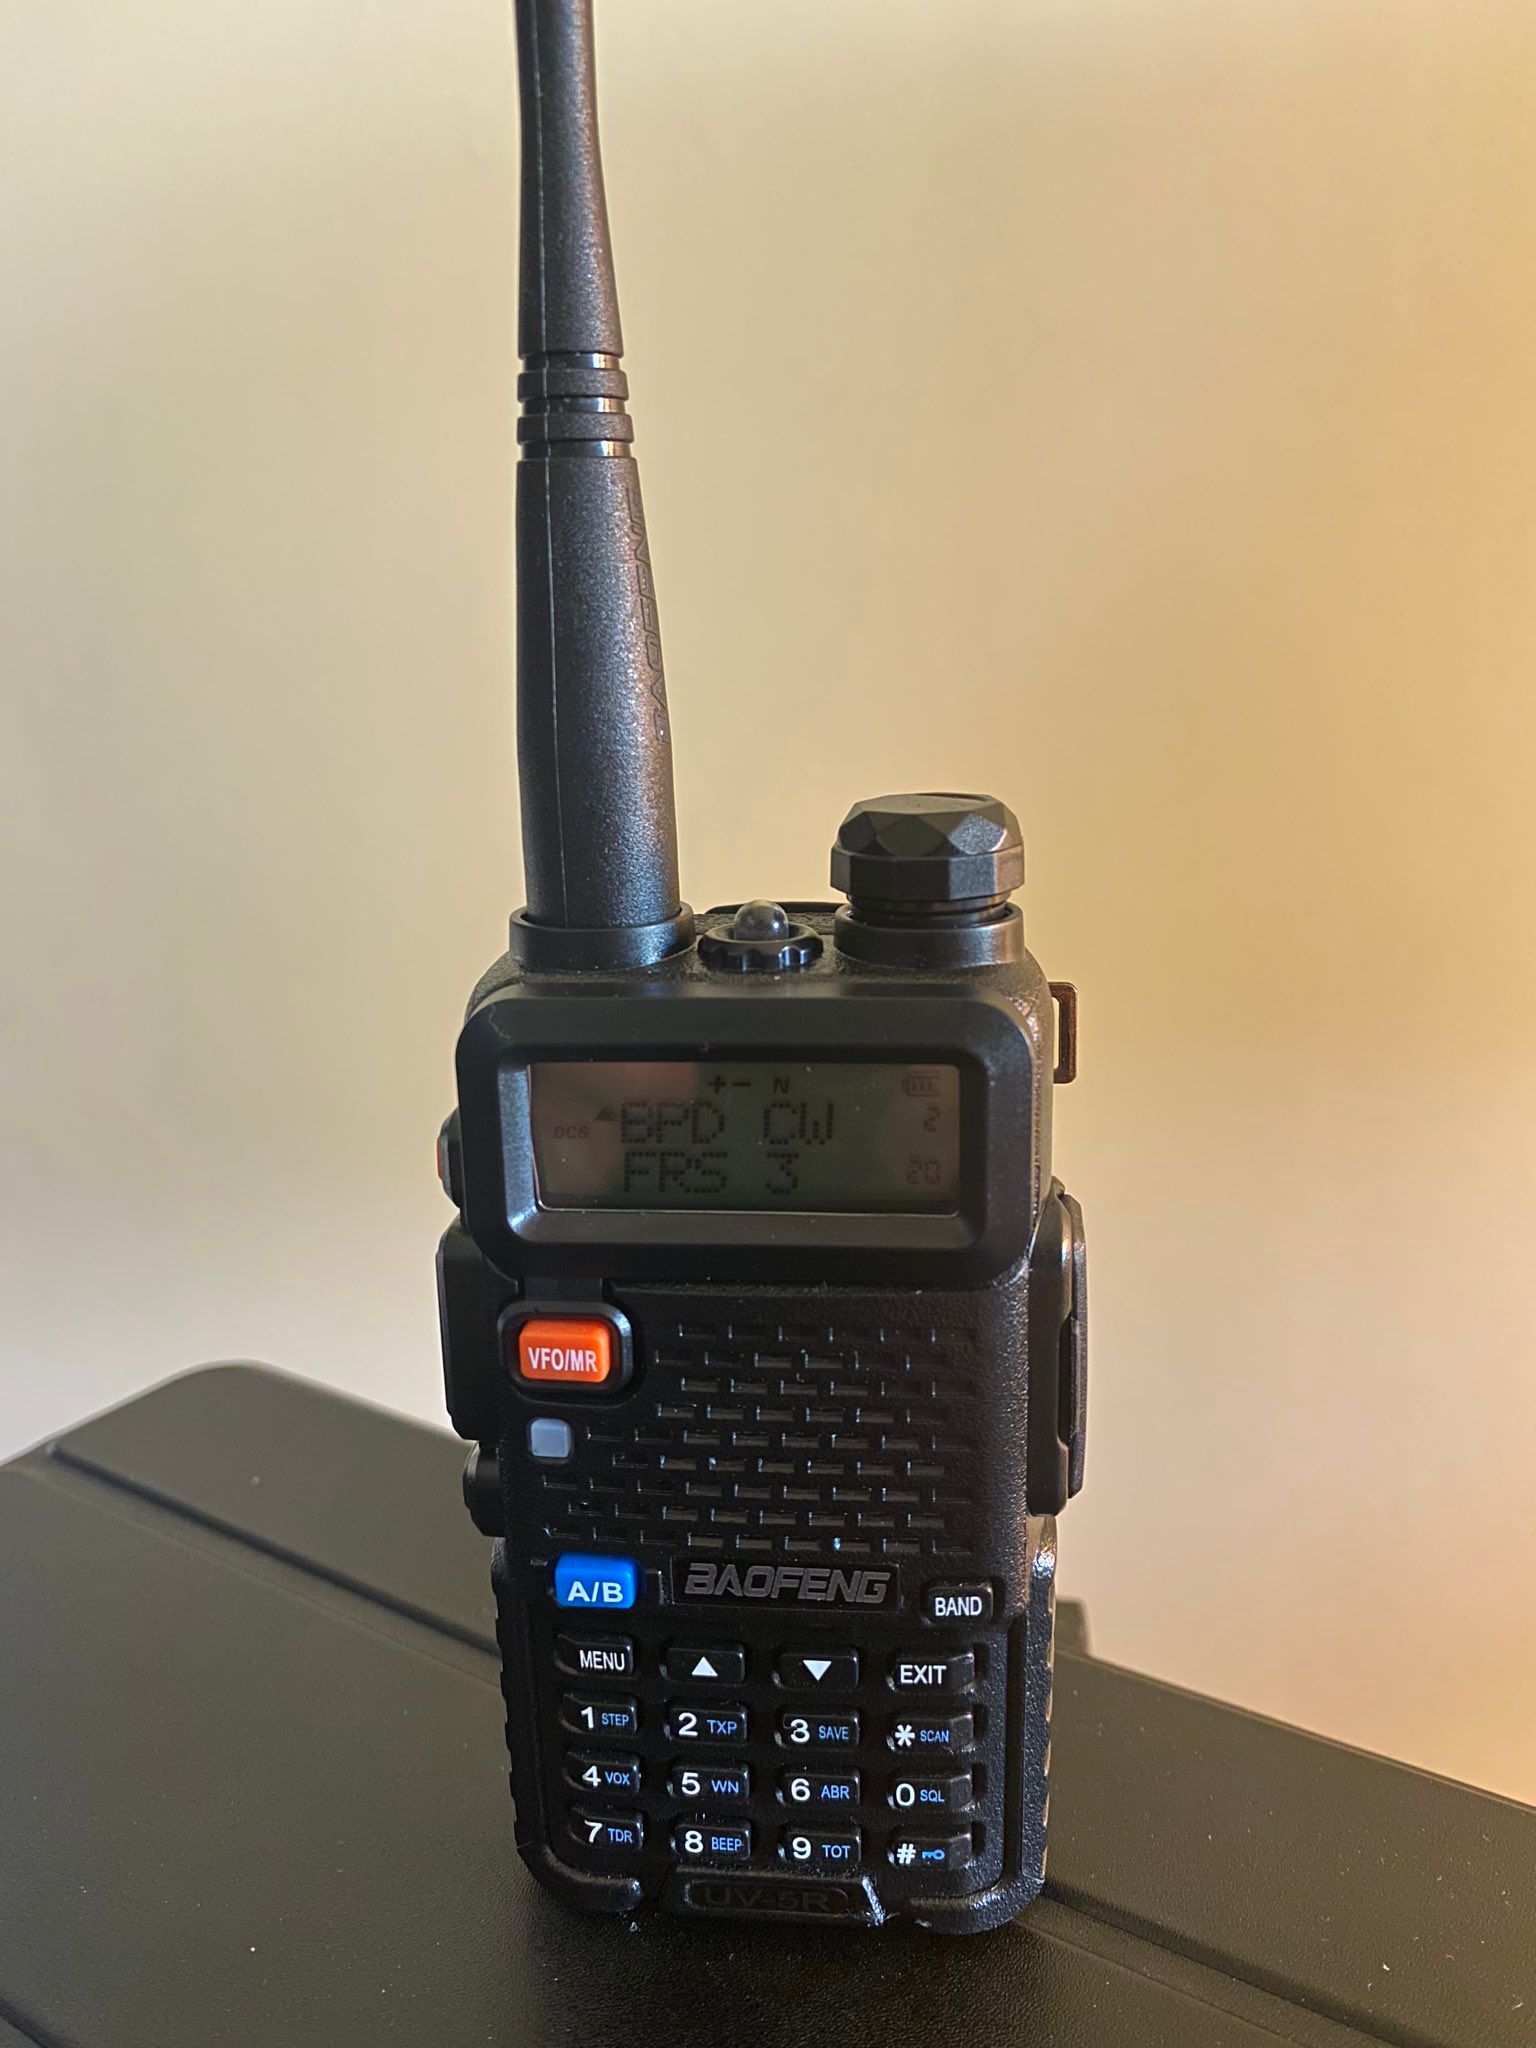 The Baofeng UV-5R and You